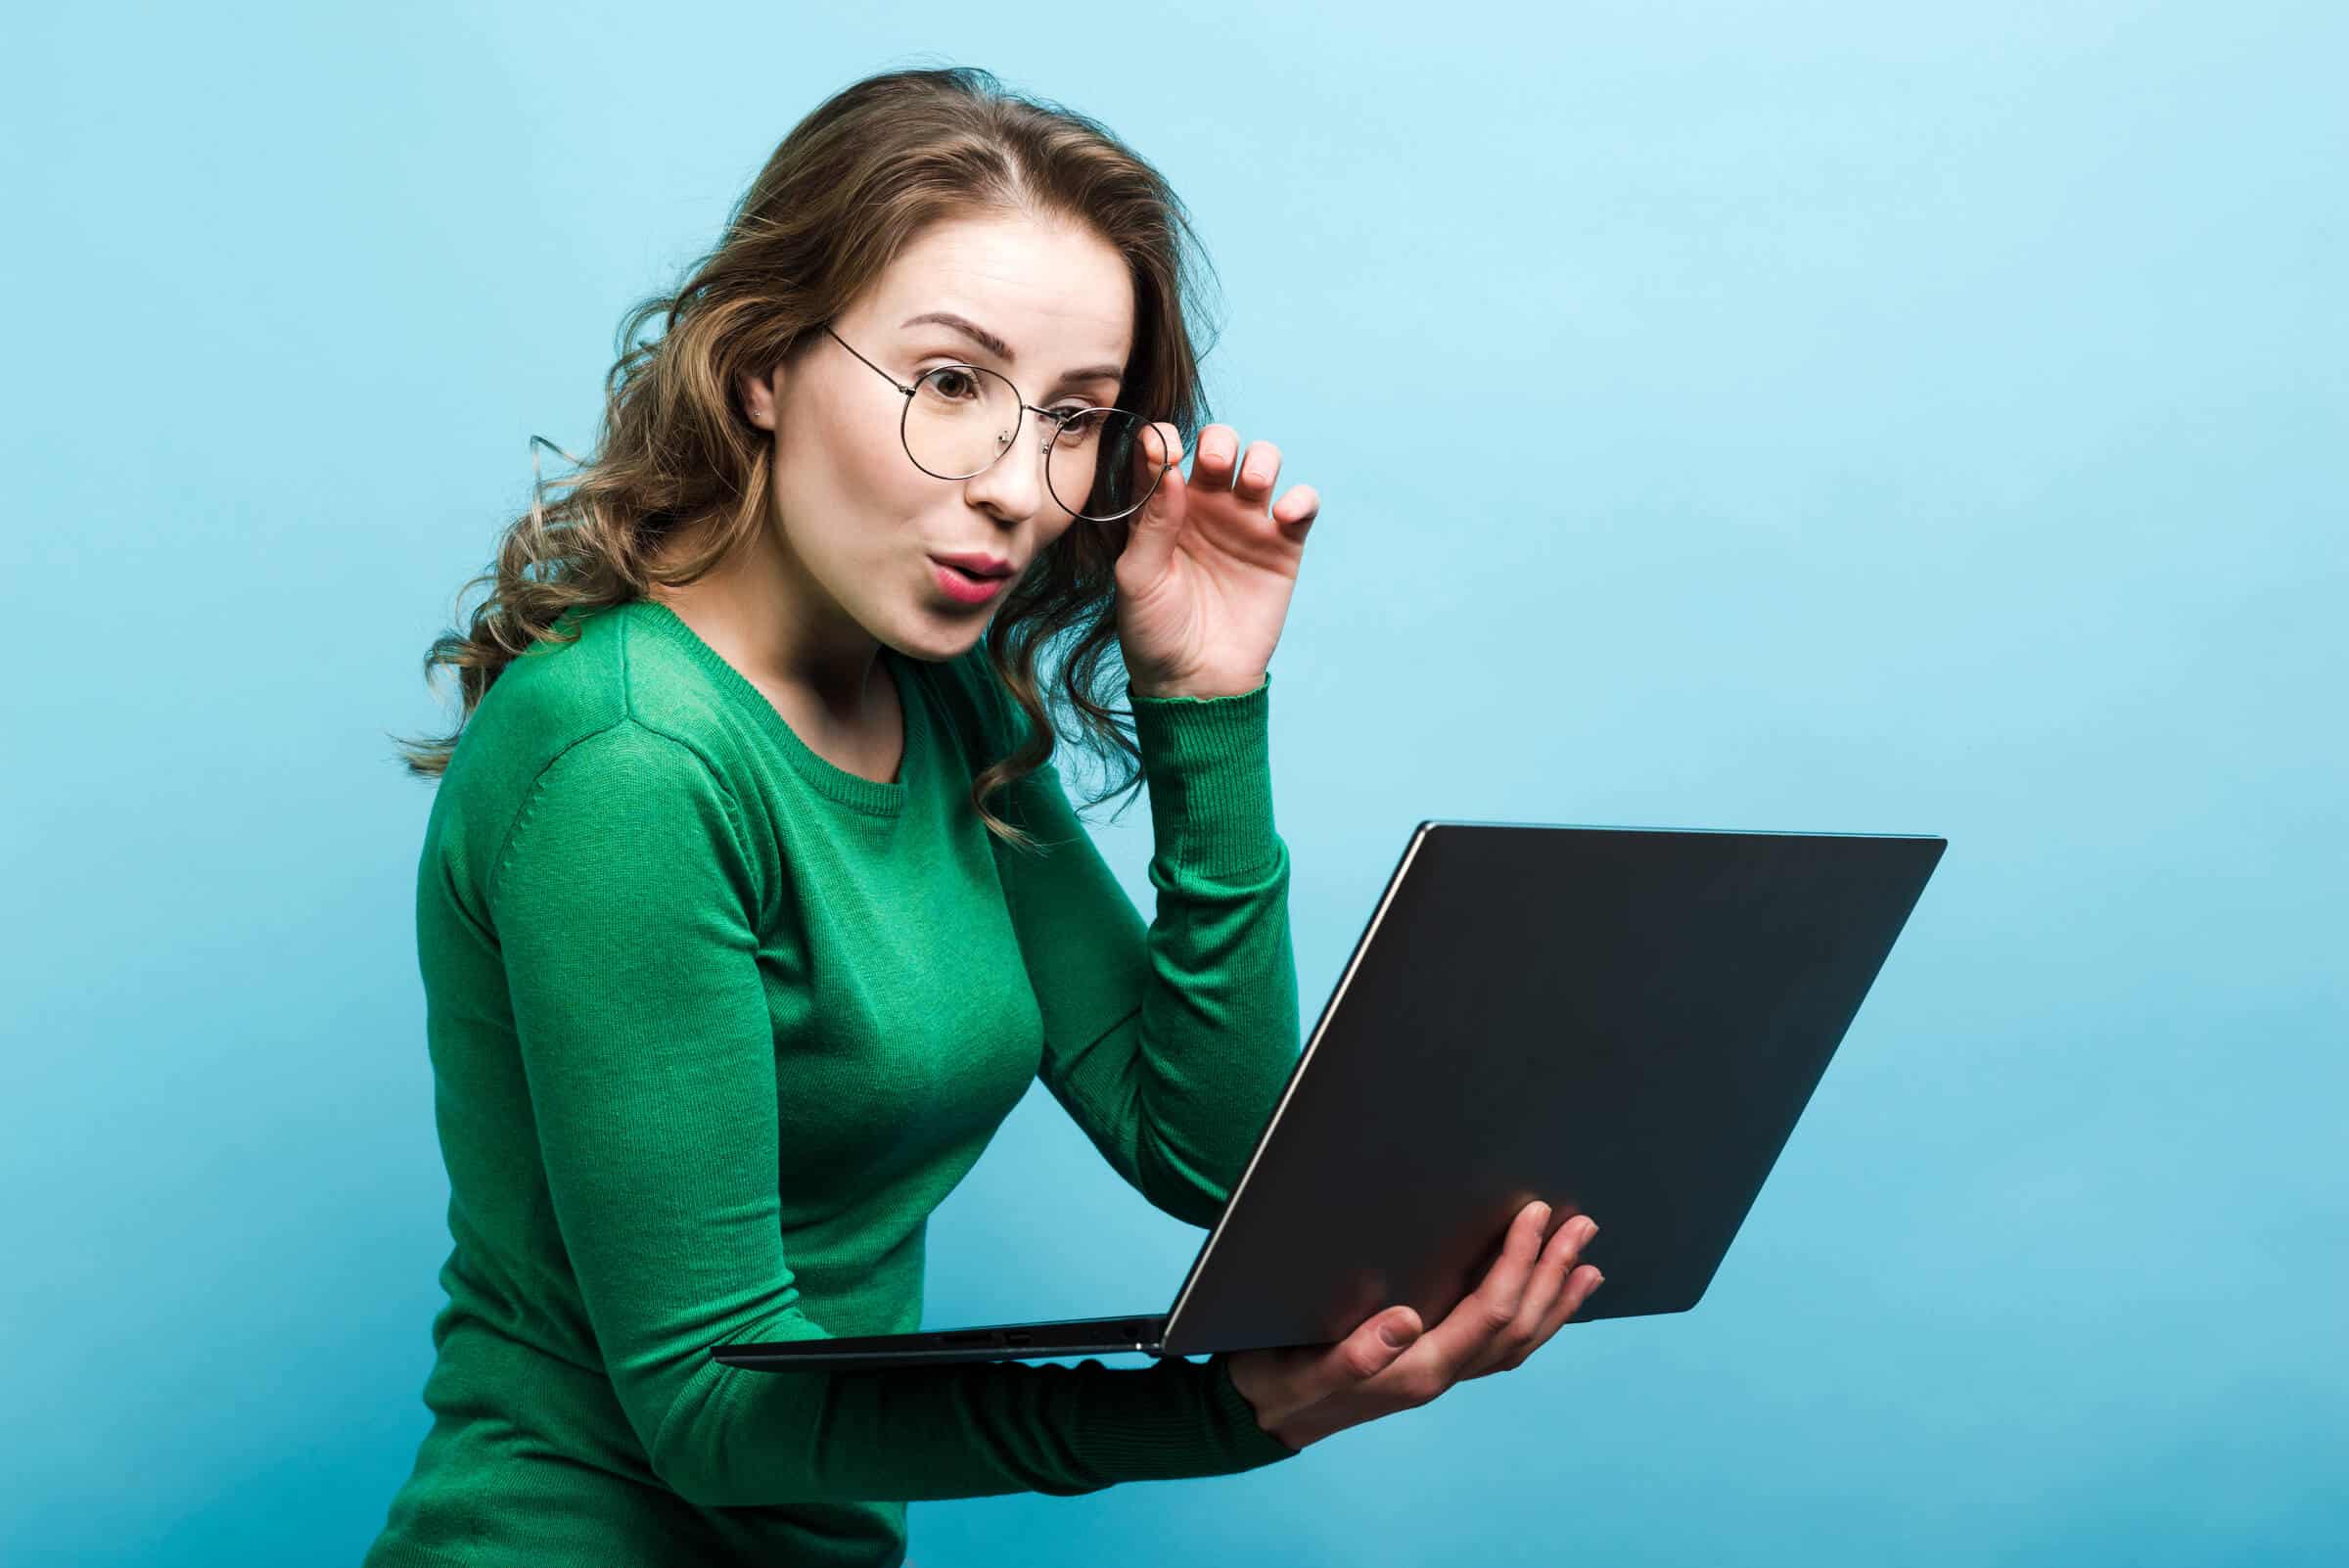 girl in glasses surprised looking at laptop against a blue background